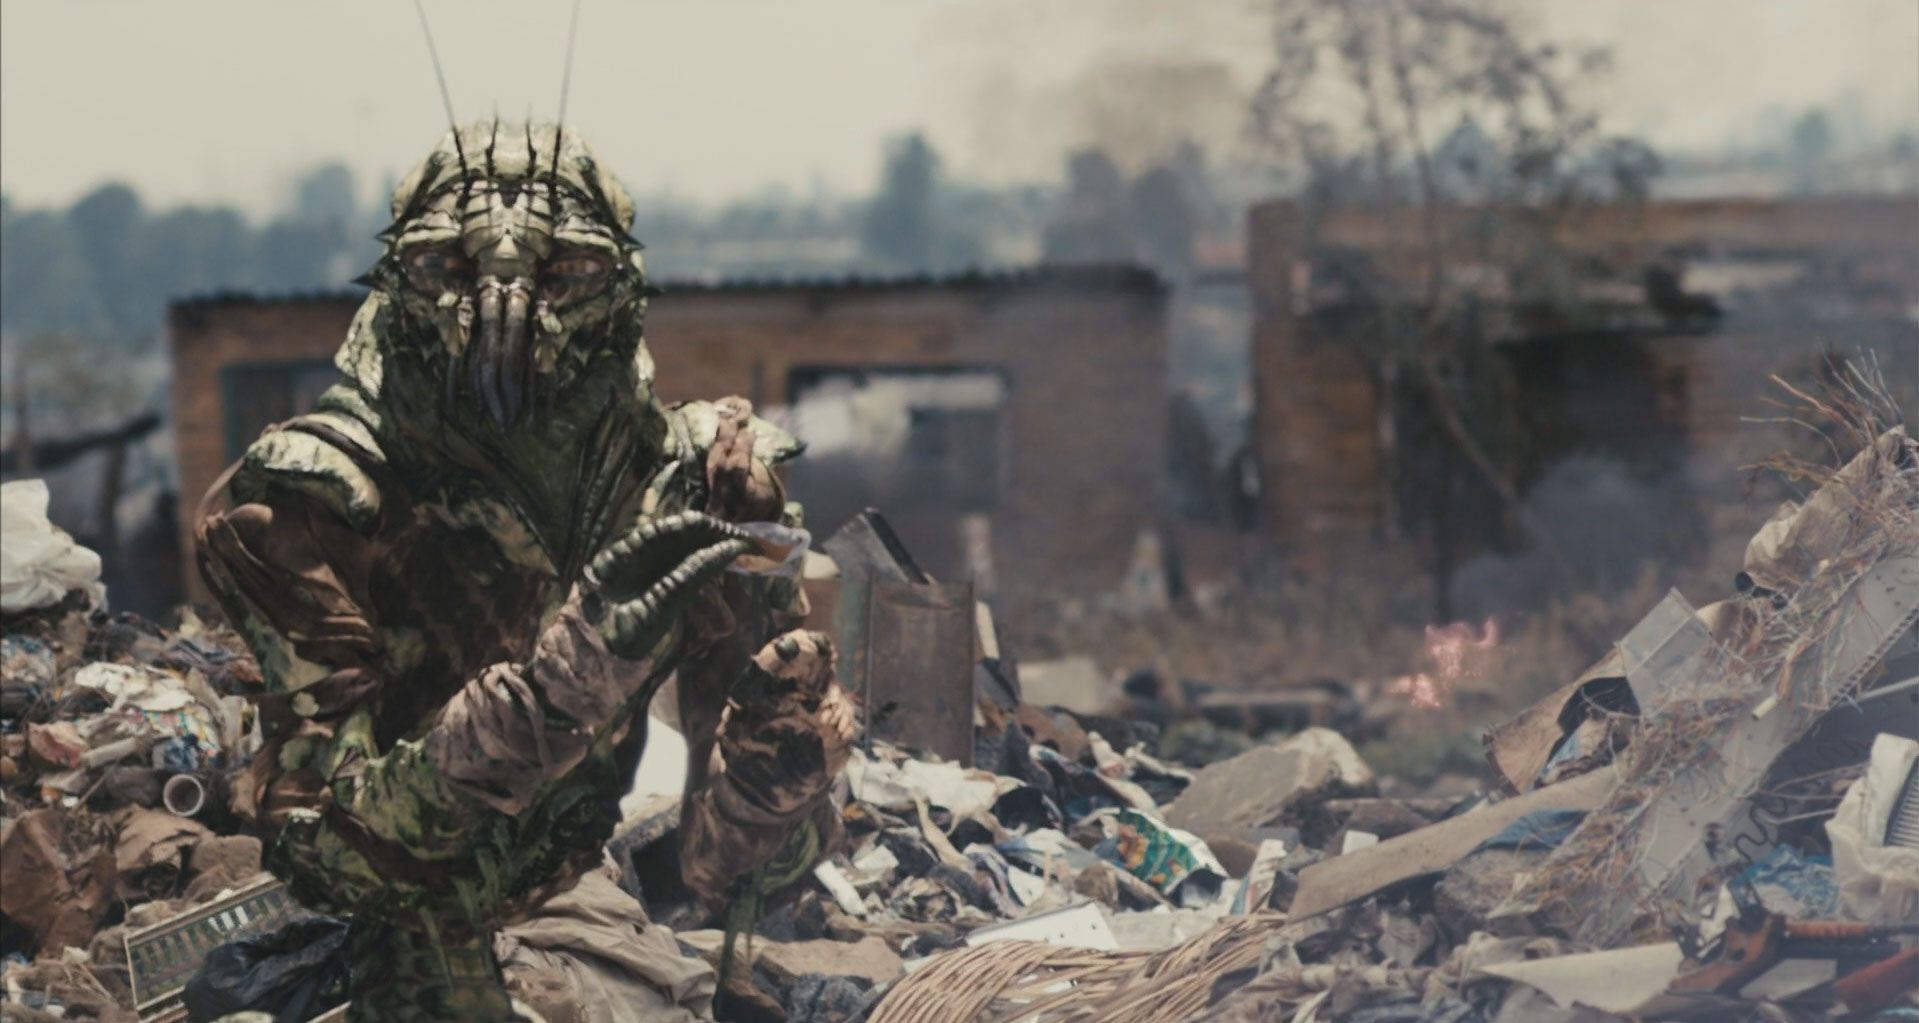 District 9: Alien as a mirror of the human being